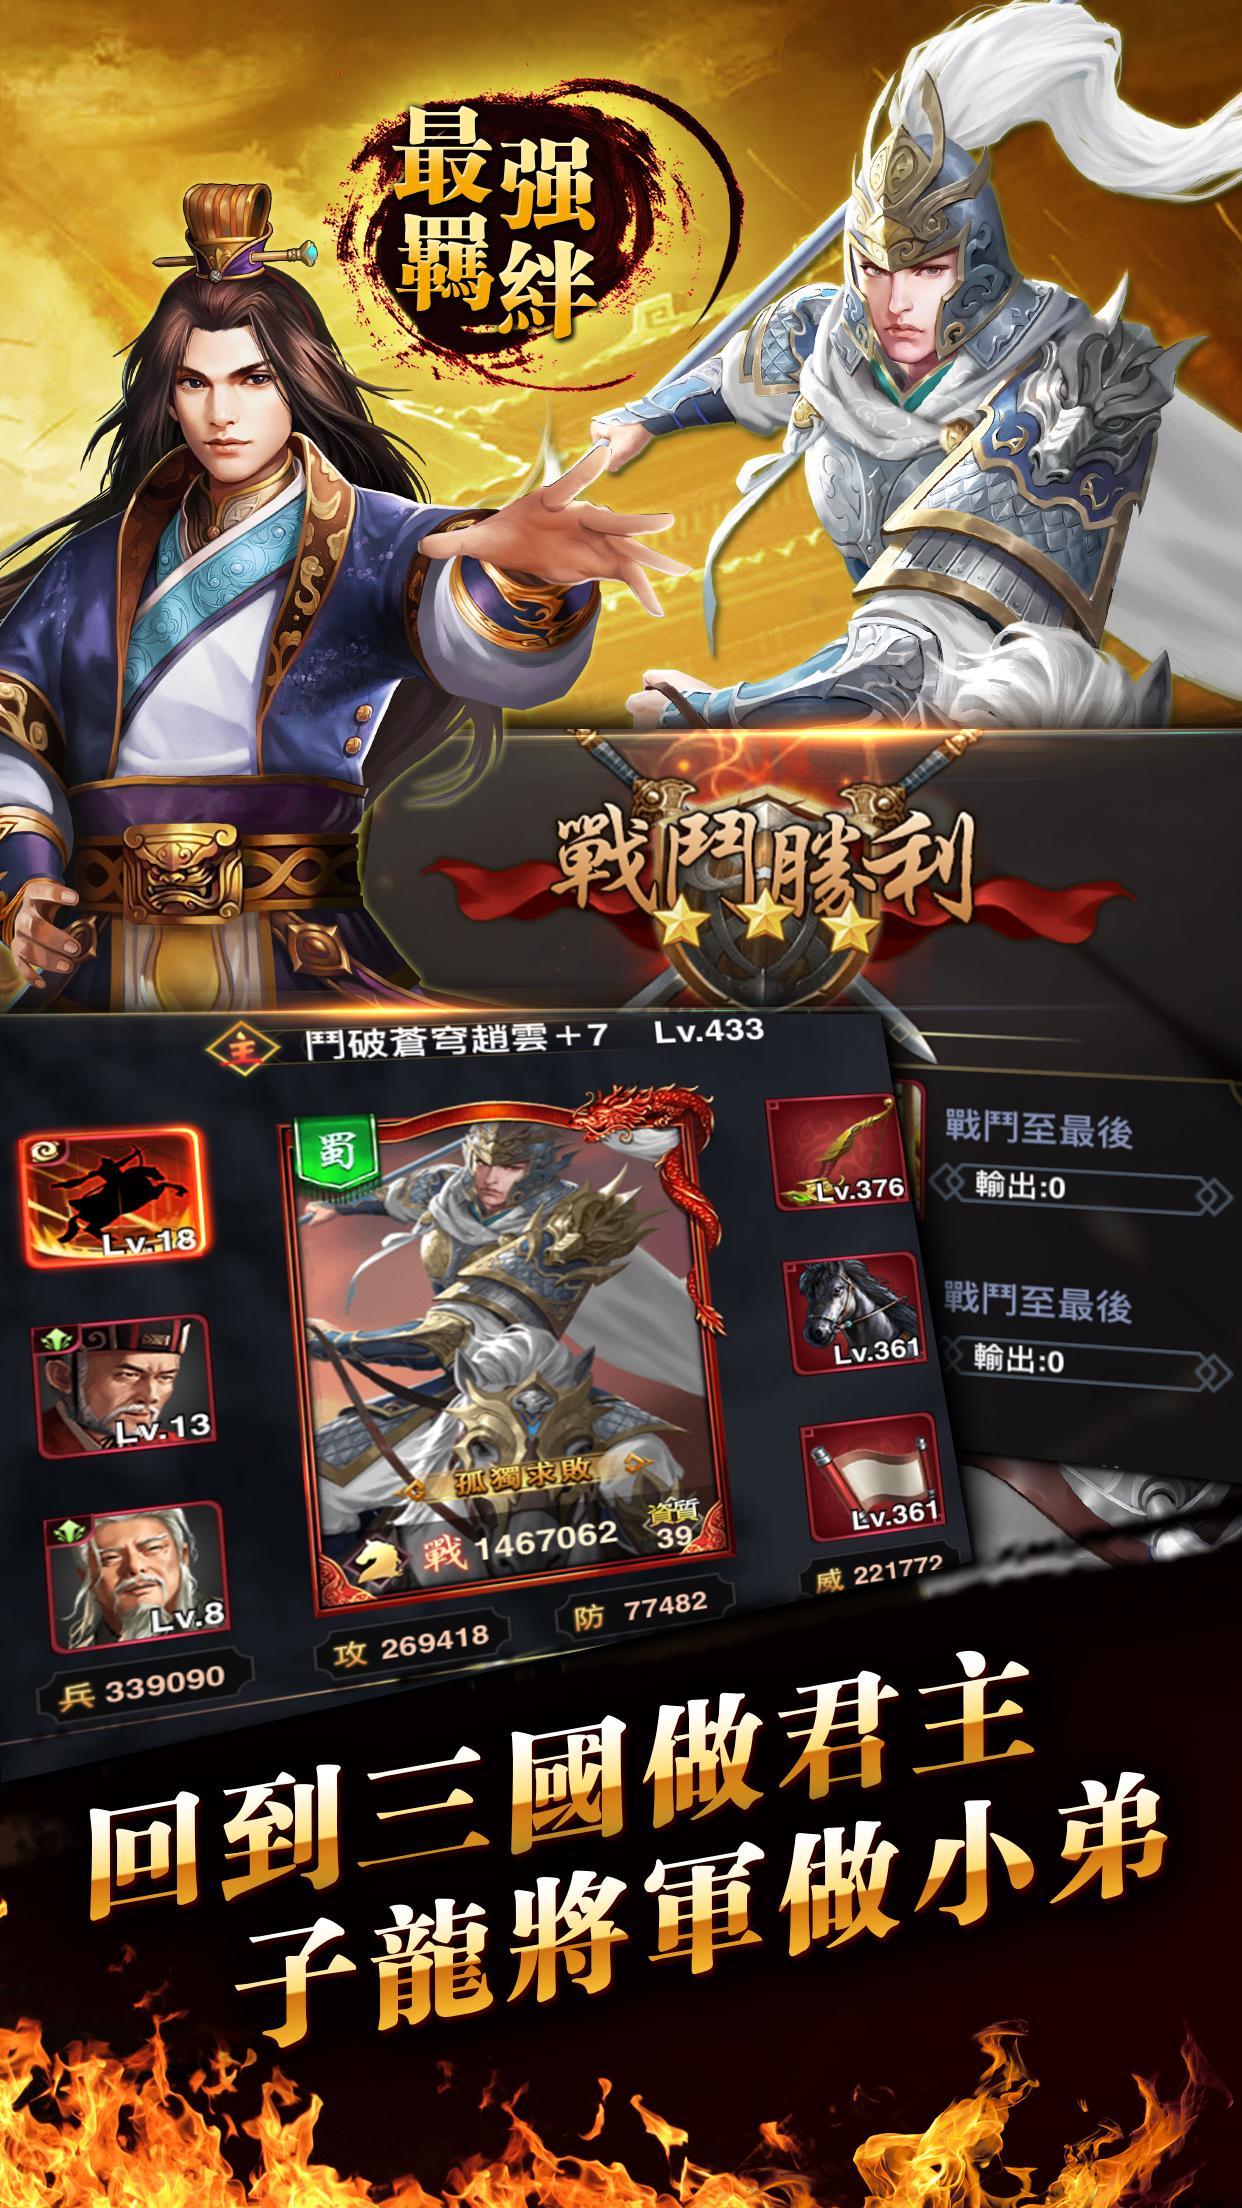 Screenshot 1 of Romance des Trois Royaumes·Légende de Zhao Yun-Idle Game of the Three Kingdoms 